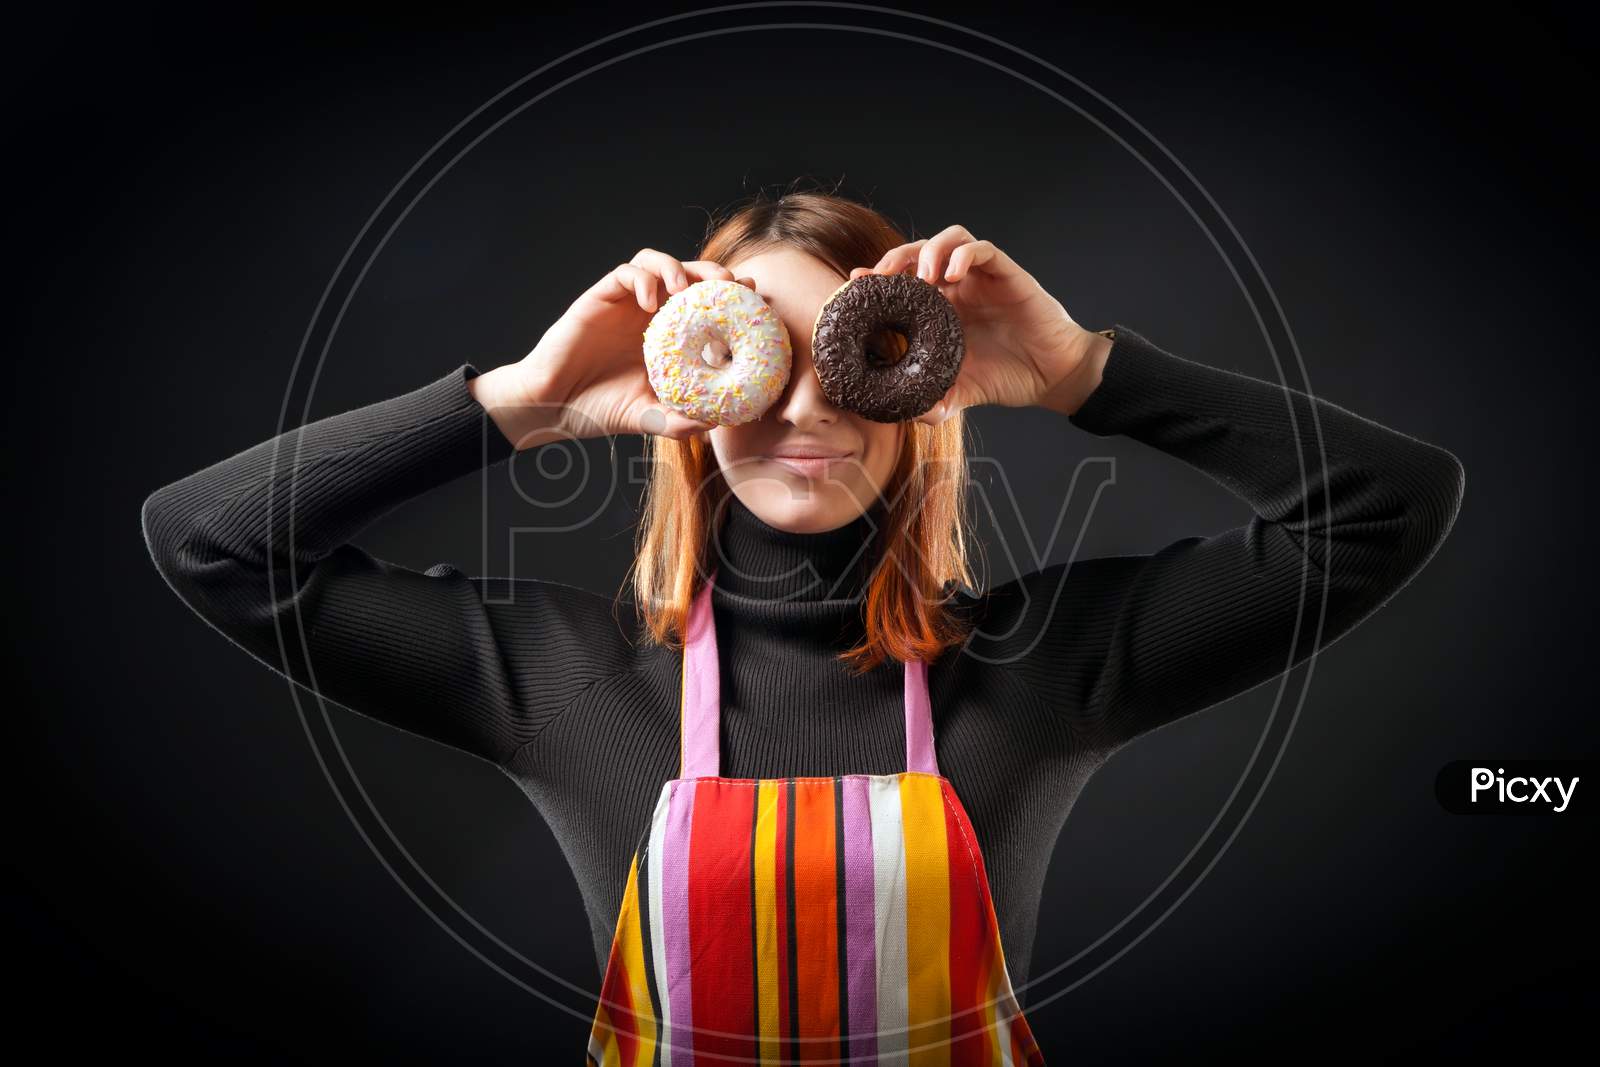 A Young Red-Haired Woman In A Black Turtleneck And Kitchen Apron Laughs And Holds Colorful Donuts As A Mask On A Black Isolated Background